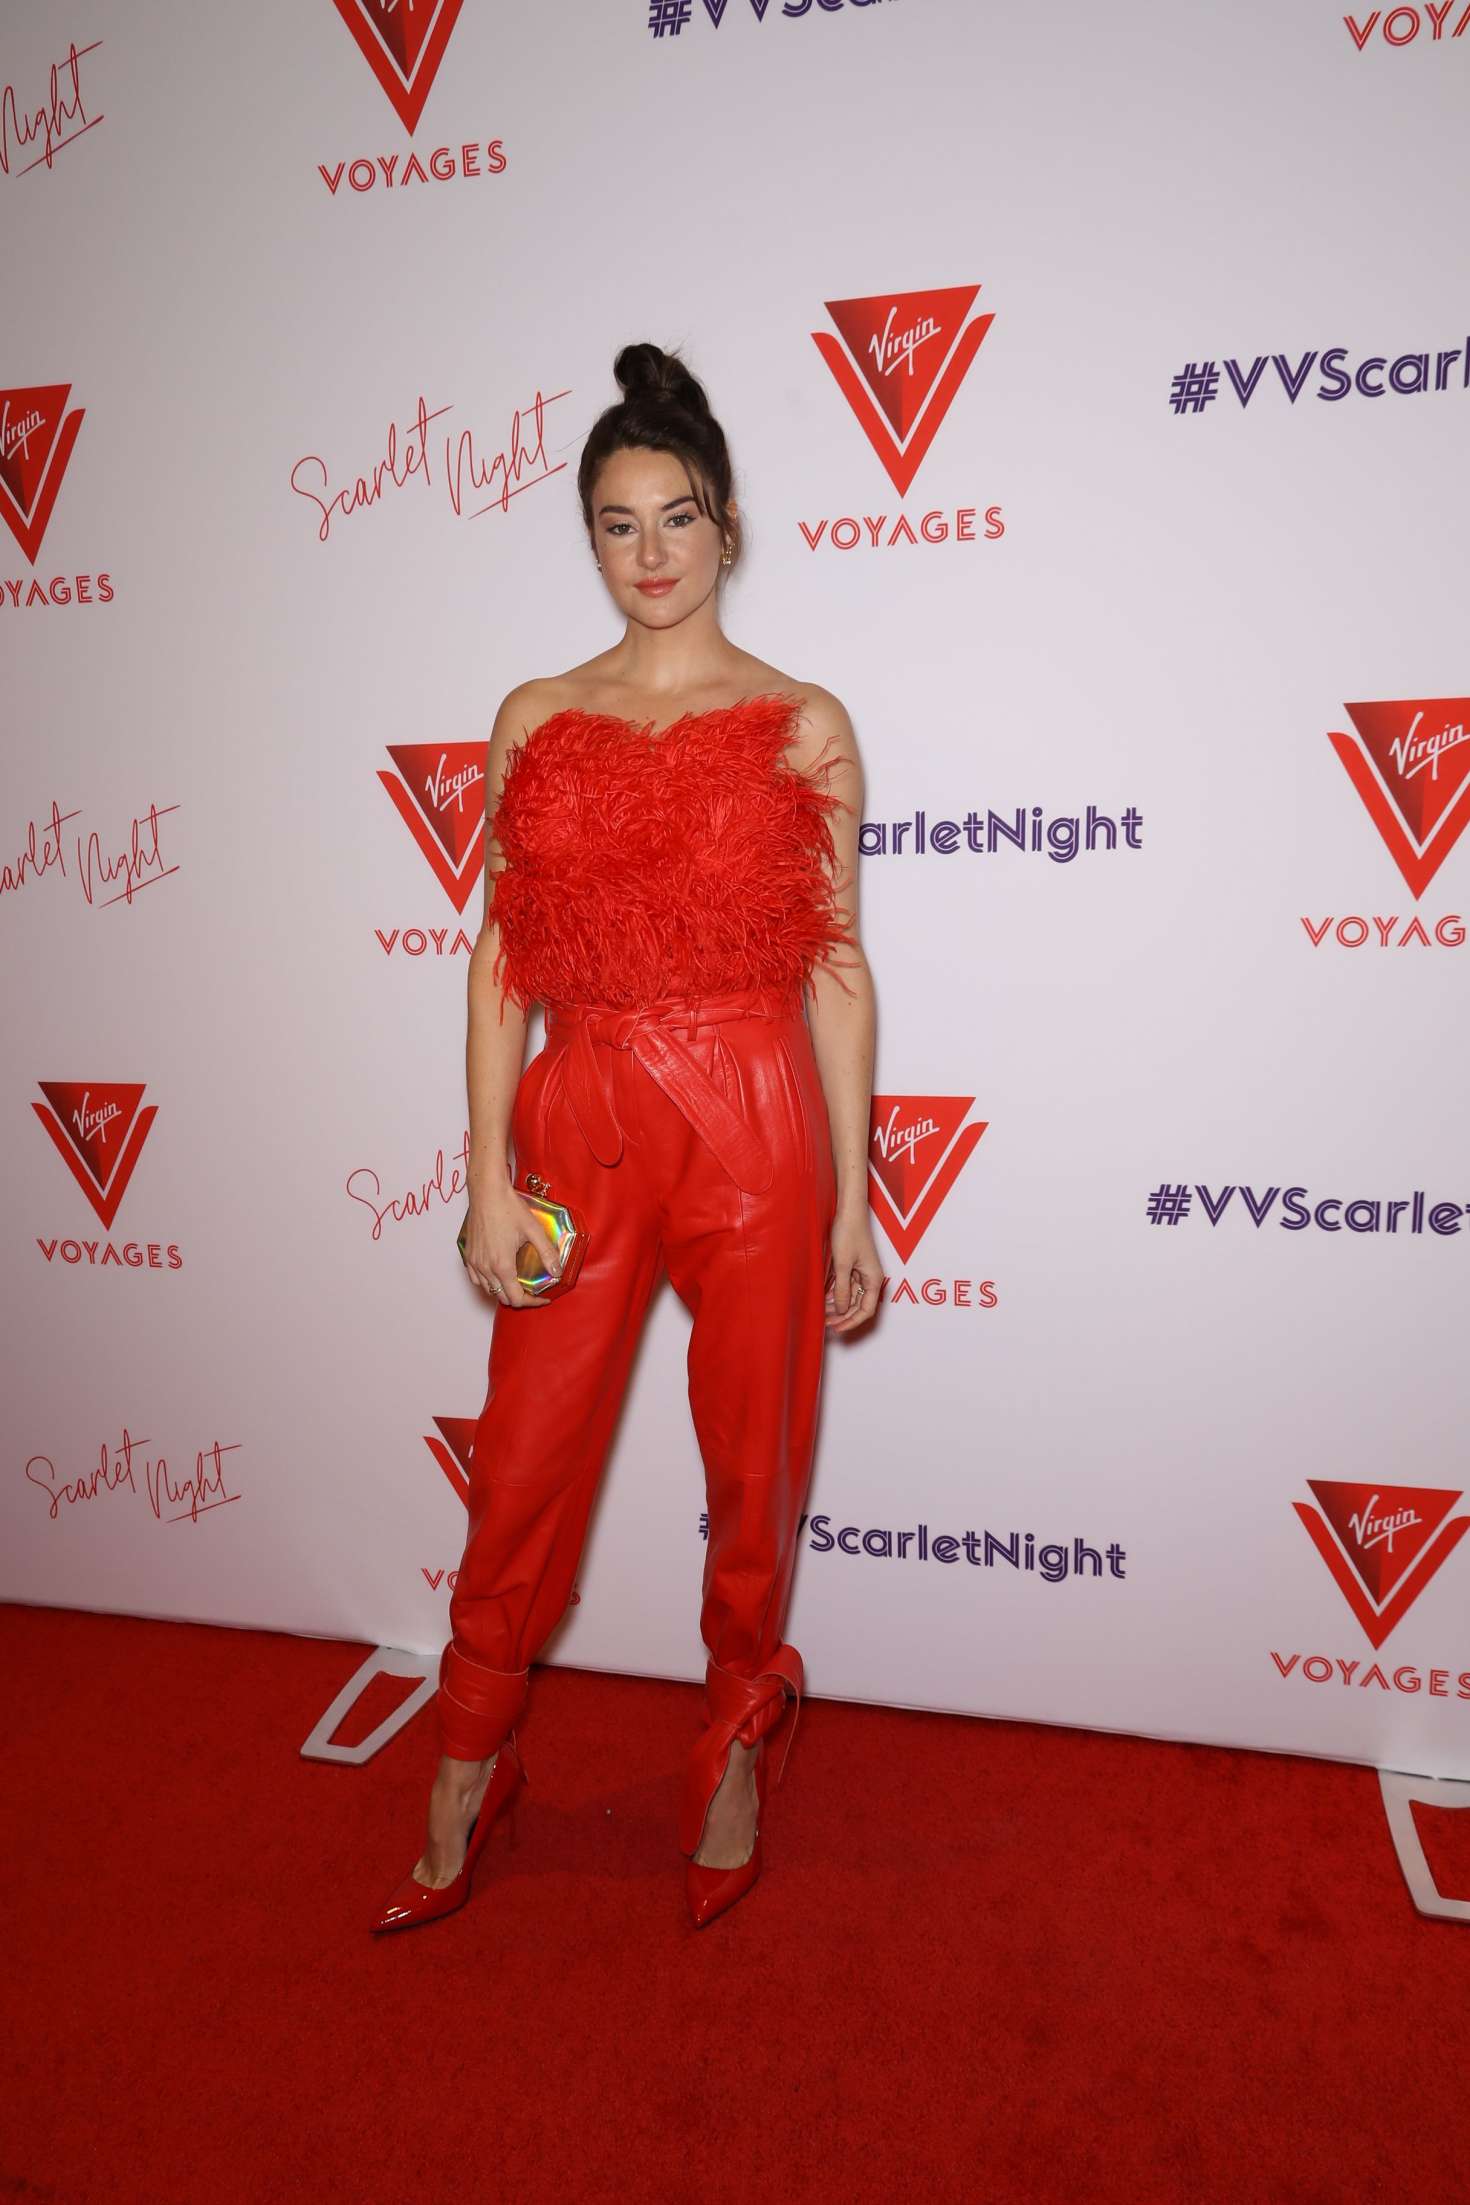 Shailene Woodley â€“ Virgin Voyages Scarlet Night Party in NY